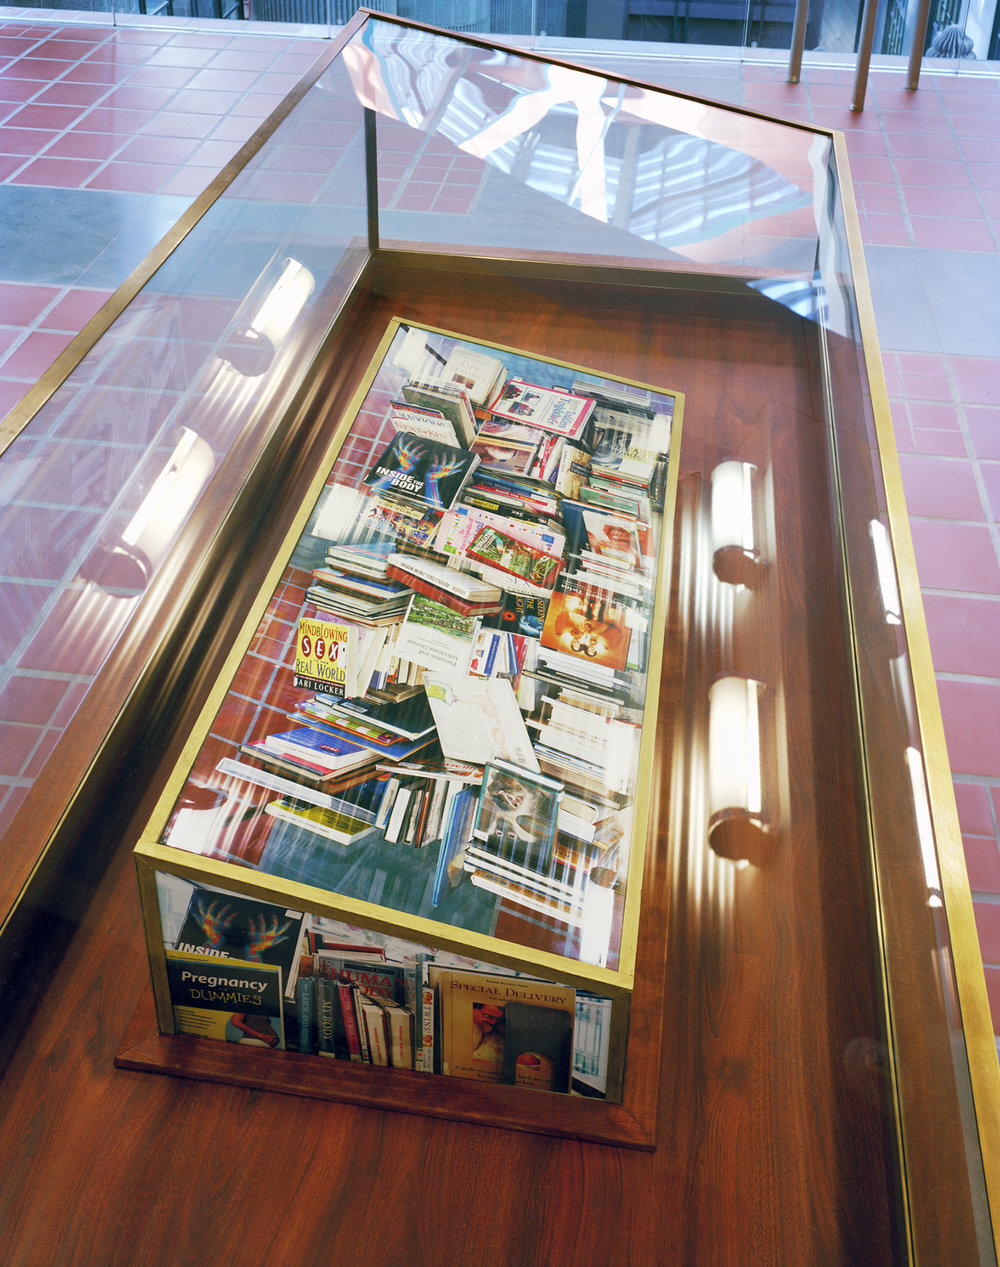   Paper Surrogate, Public Project ,&nbsp; Los Angeles Central Library&nbsp; (Top View), 2010 Wood, acrylic paint, and photographs 